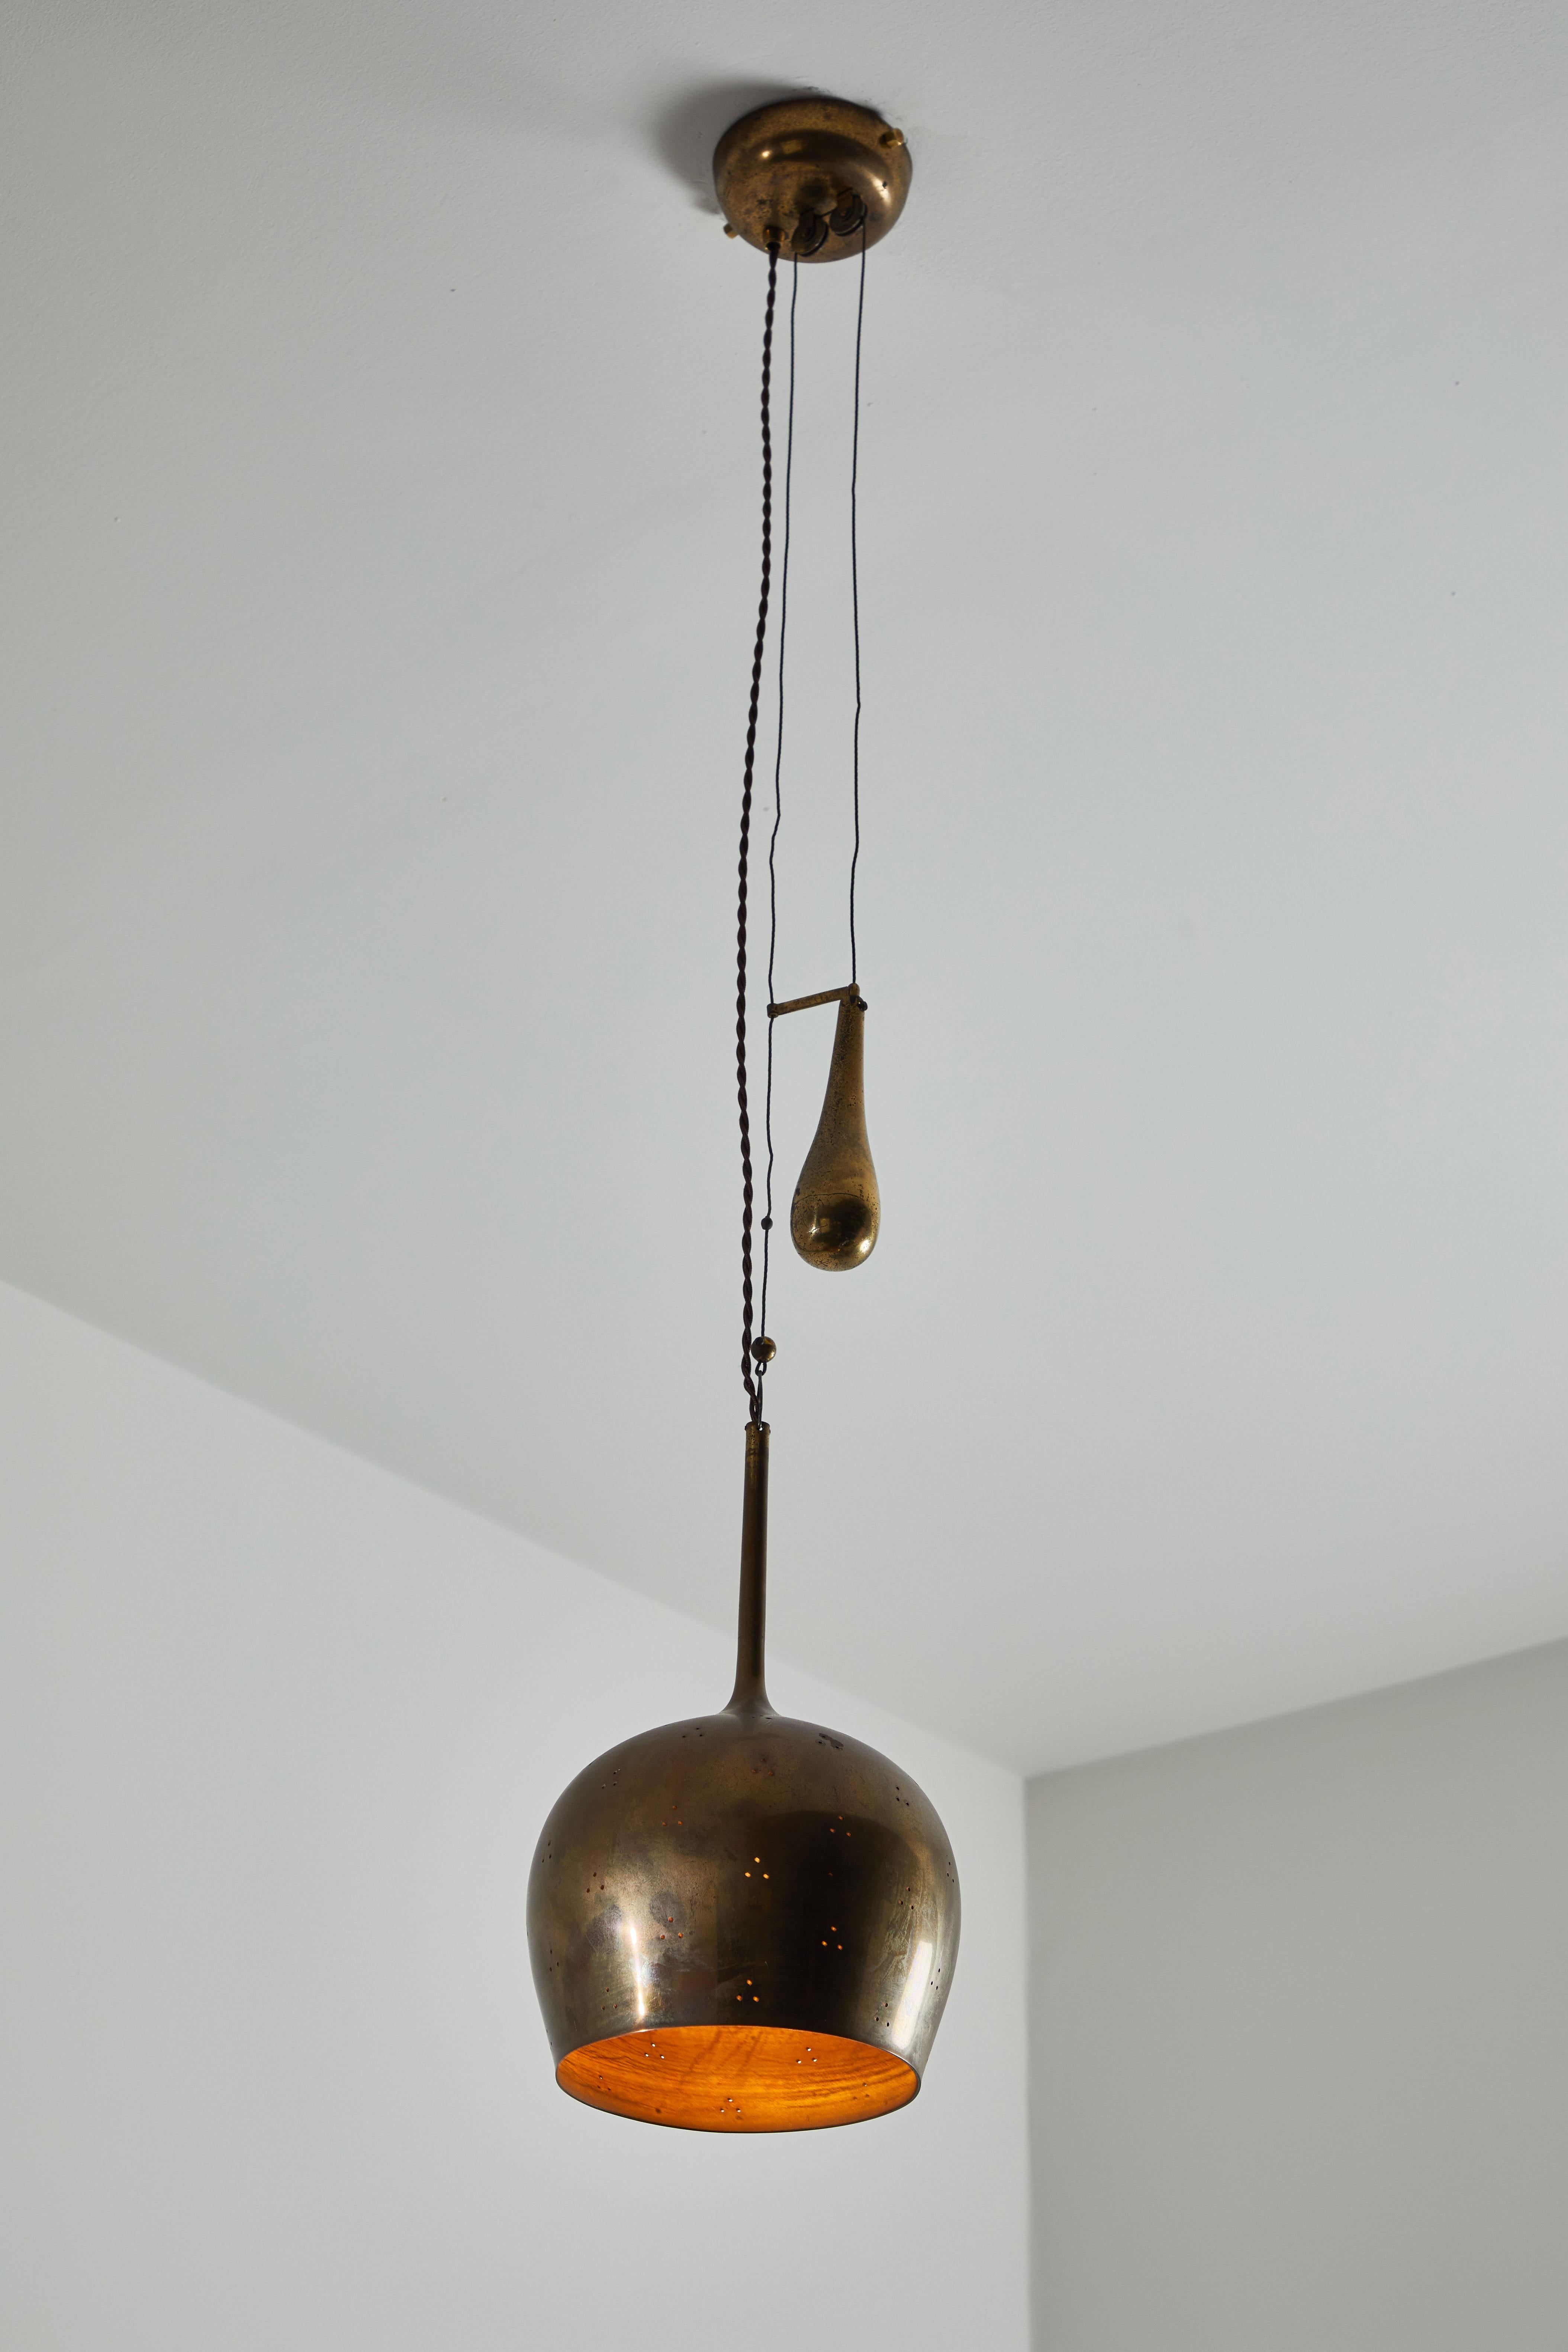 Finnish Counterweight Pendant by Paavo Tynell